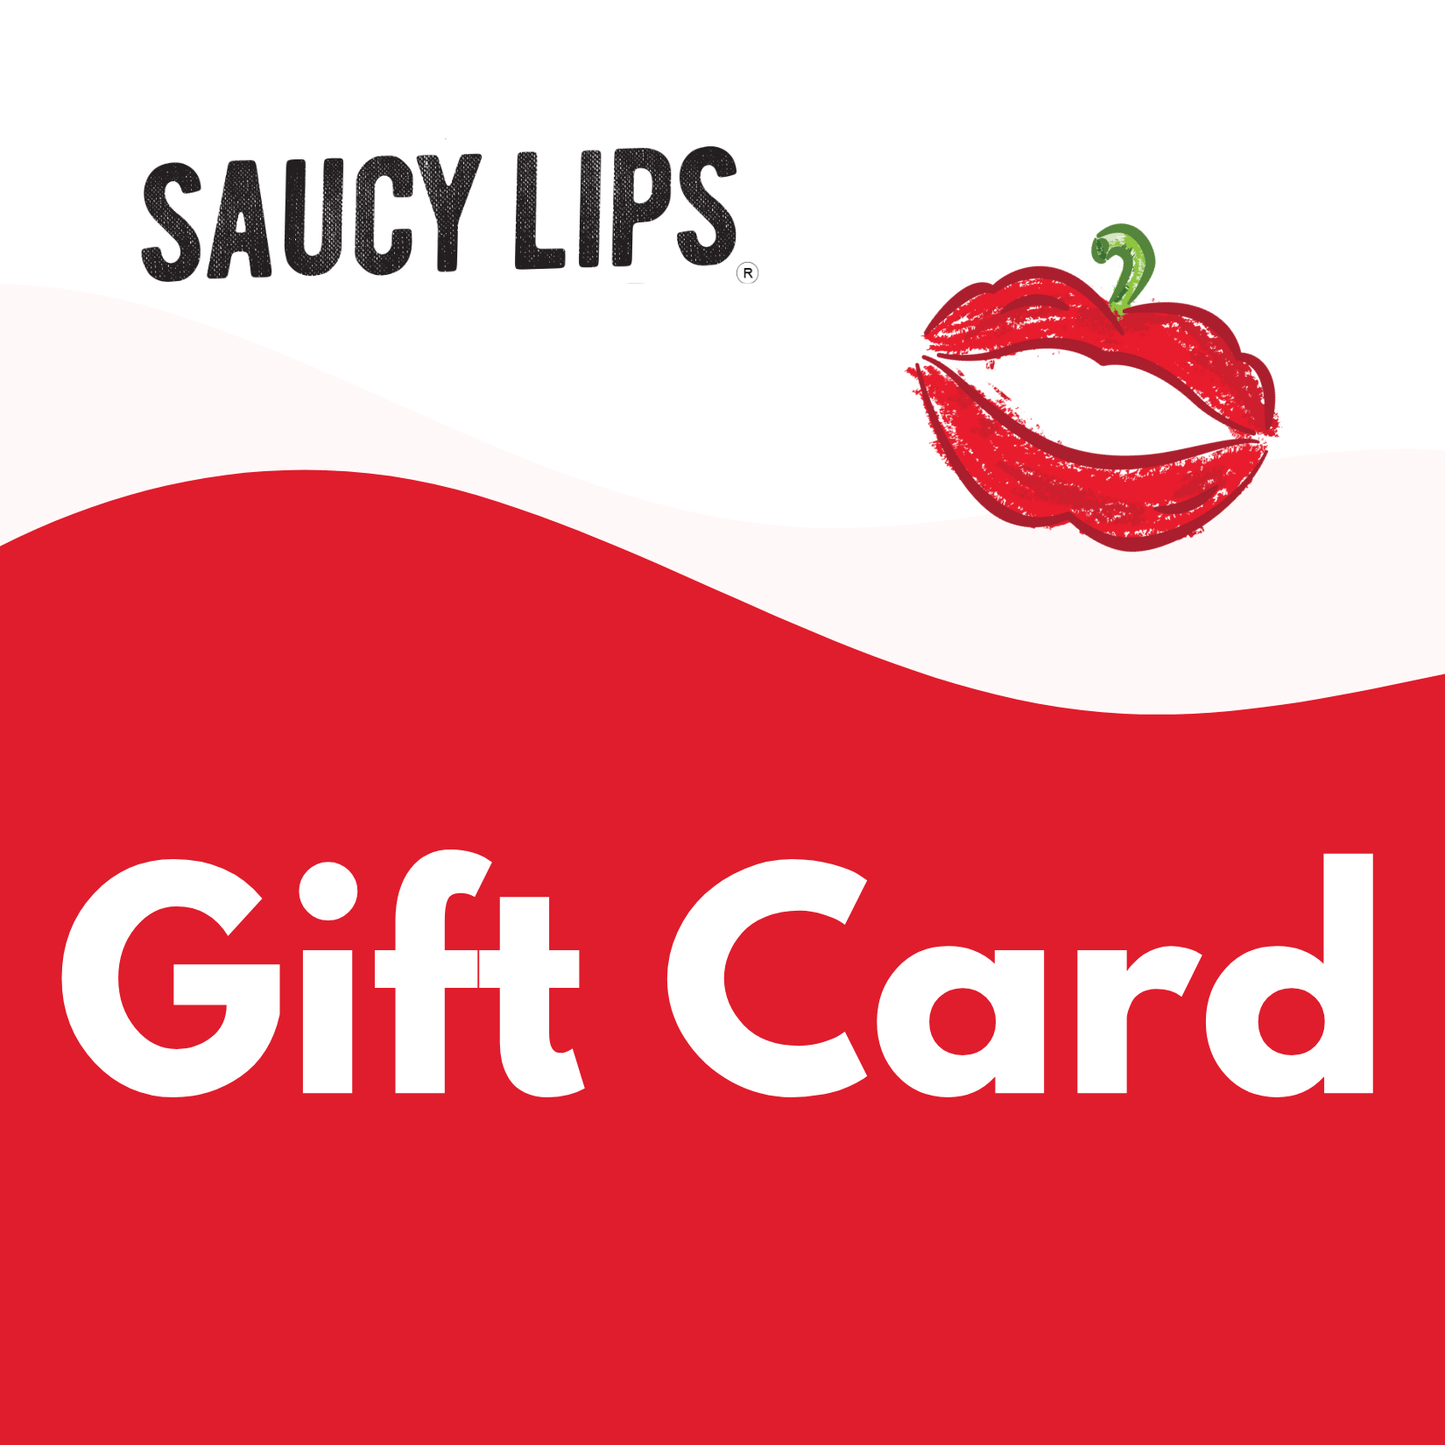 Saucy Lips Gift Card - Saucy Lips Foods - Authentic Sauce Flavors from the Heart of México